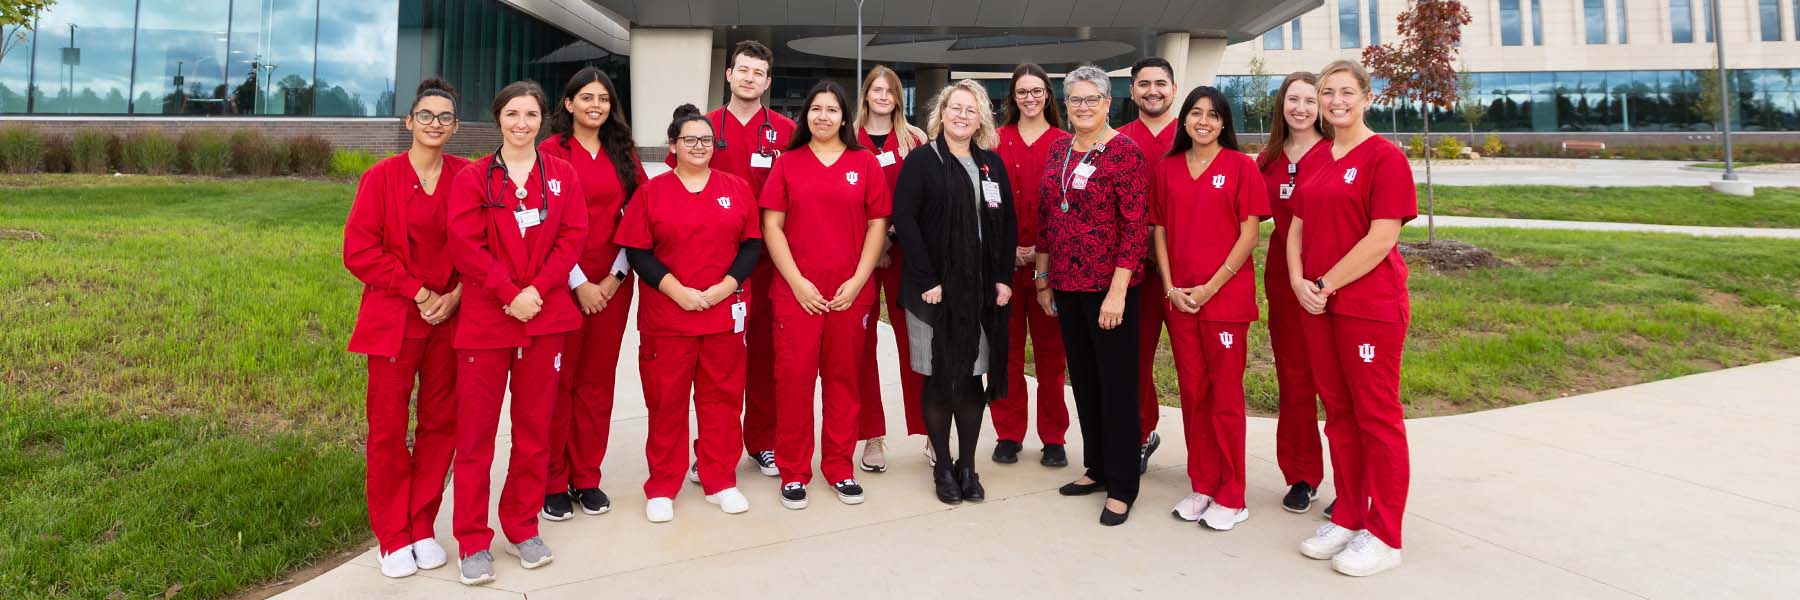 IUB nursing students and faculty in front of the IU Health Bloomington Regional Academic Health Center